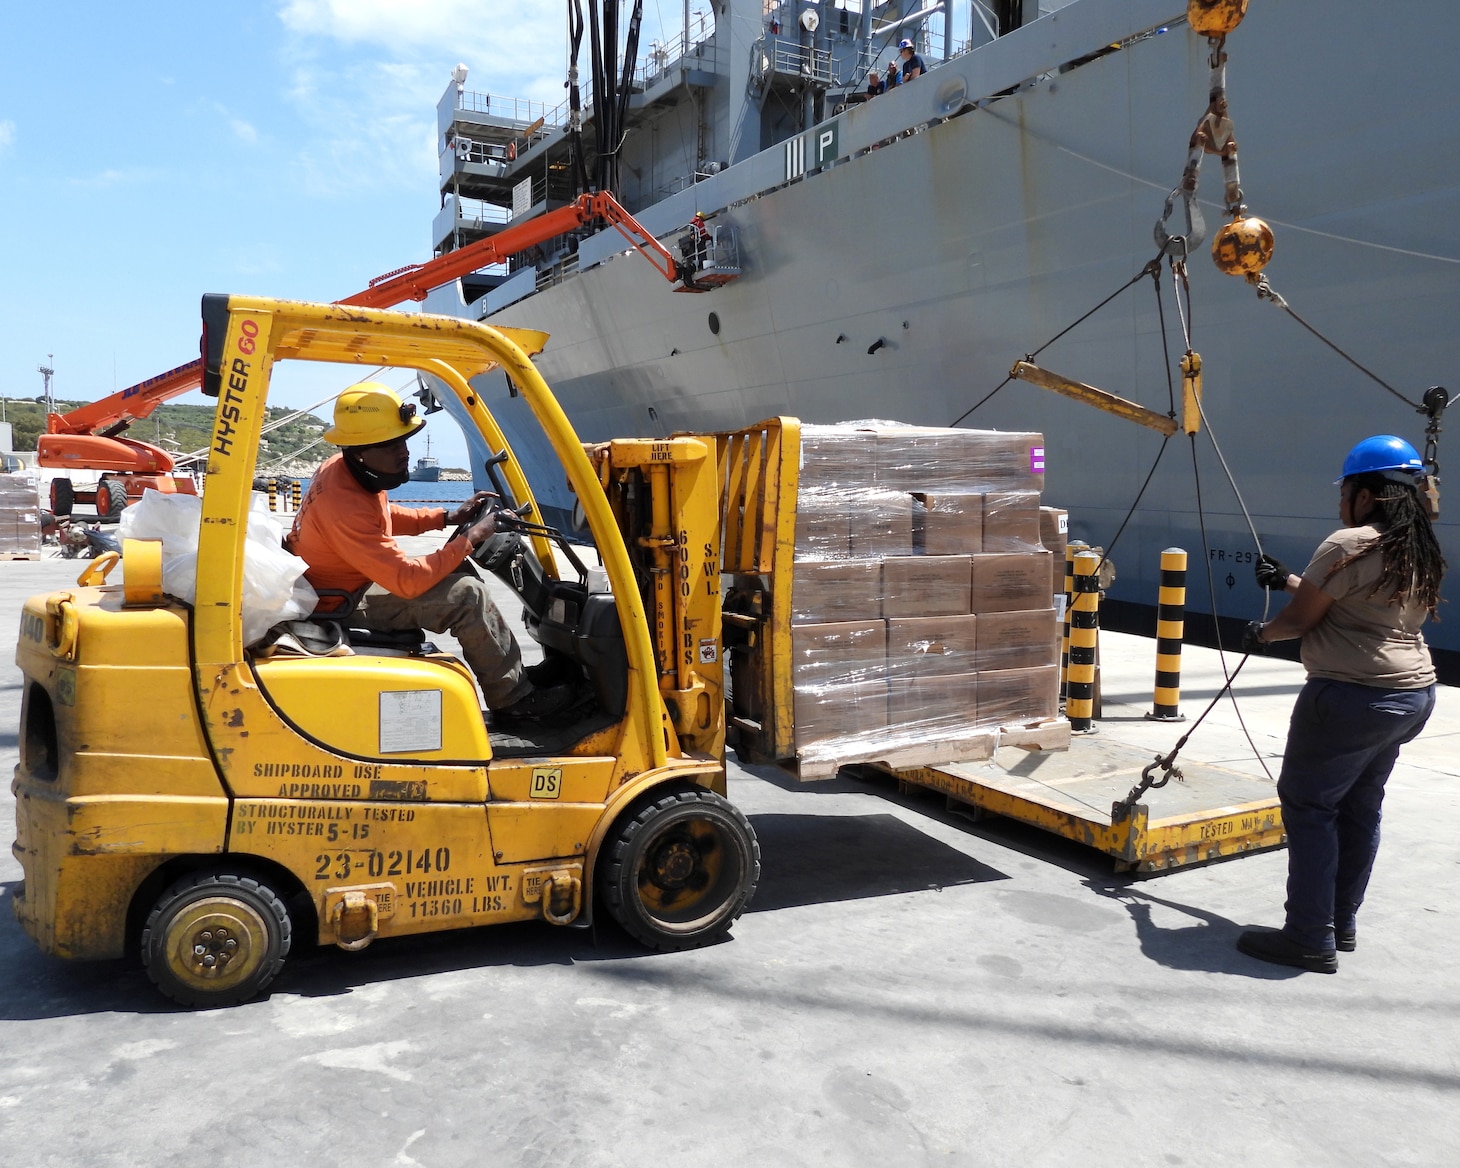 A man drives a forklift that is lifting a pallet of boxes while a woman steadies a platform so that the cargo can be lifted by crane onto the USNS Supply.